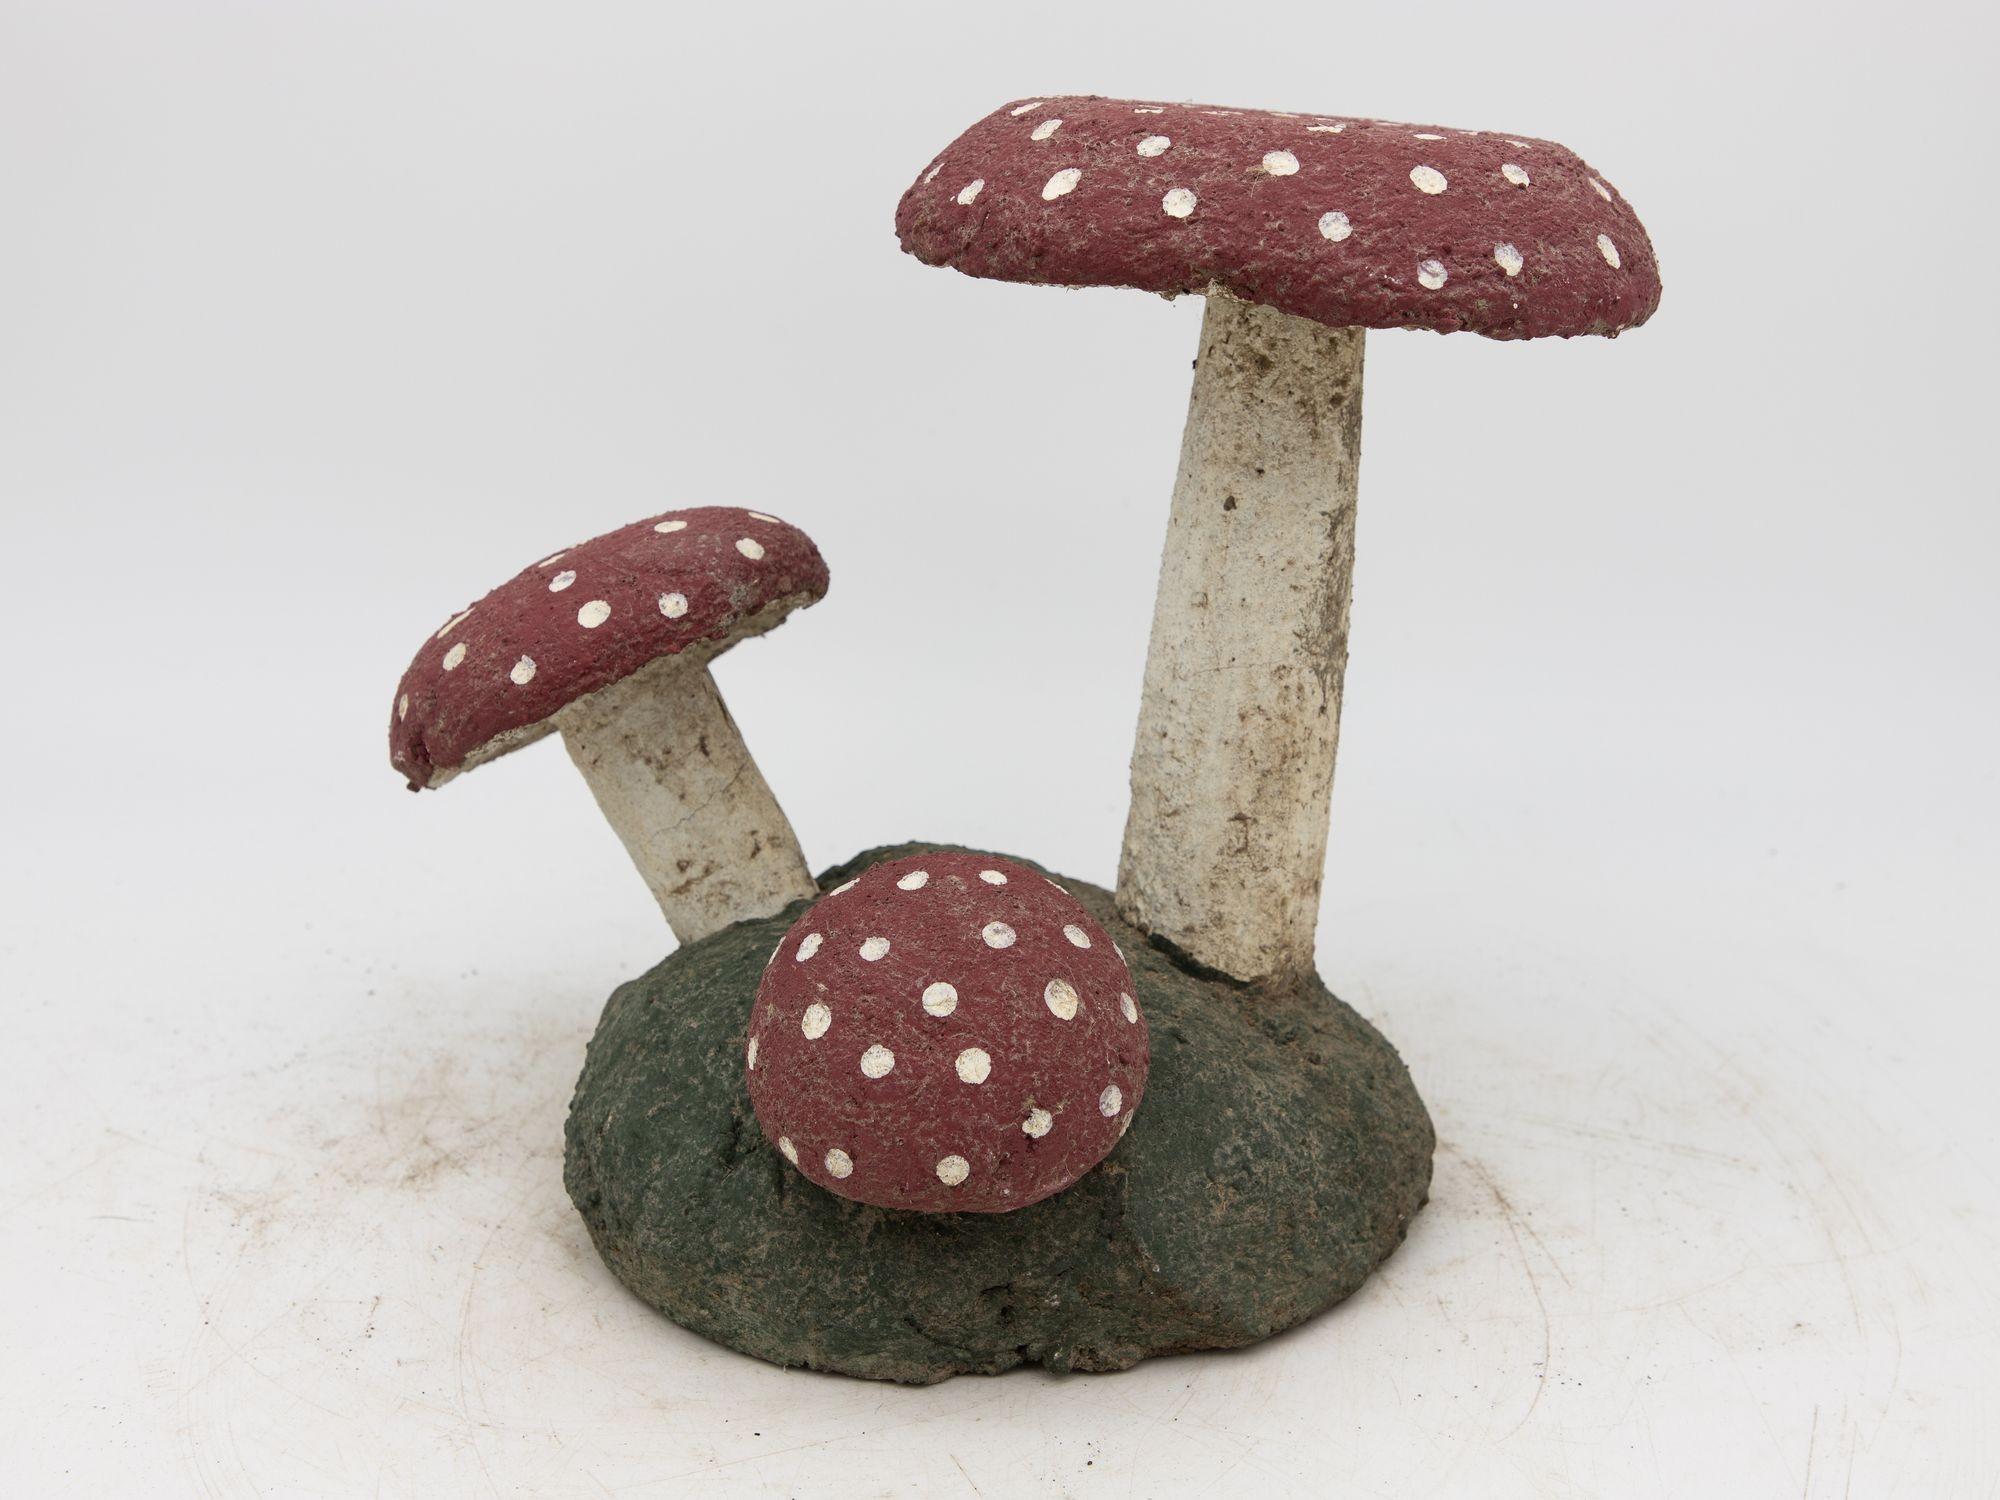 20th Century Pair Vintage Painted Stone Toadstools Mushrooms with Red Caps For Sale